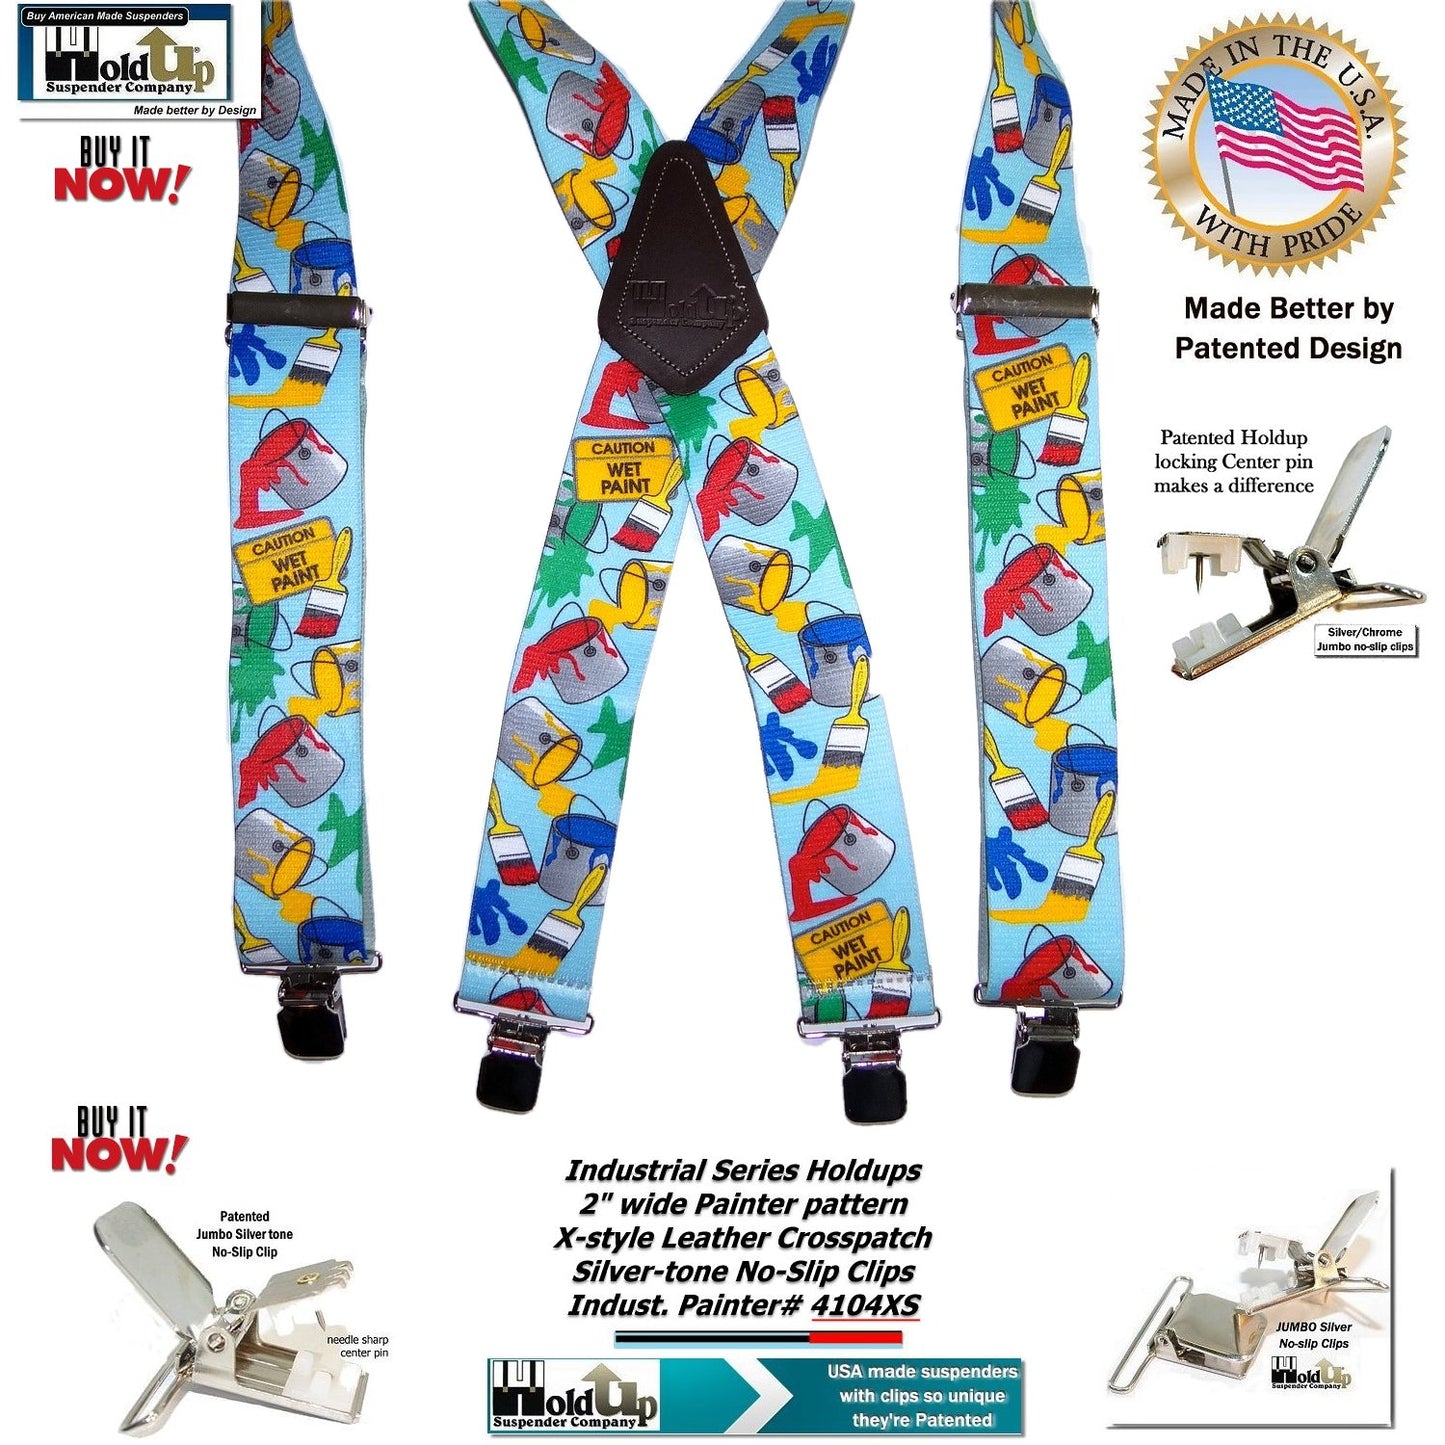 Hold-Ups Tradesman Series 2" Wide in Painter Pattern Suspenders with Patented No-slip Silver Clips